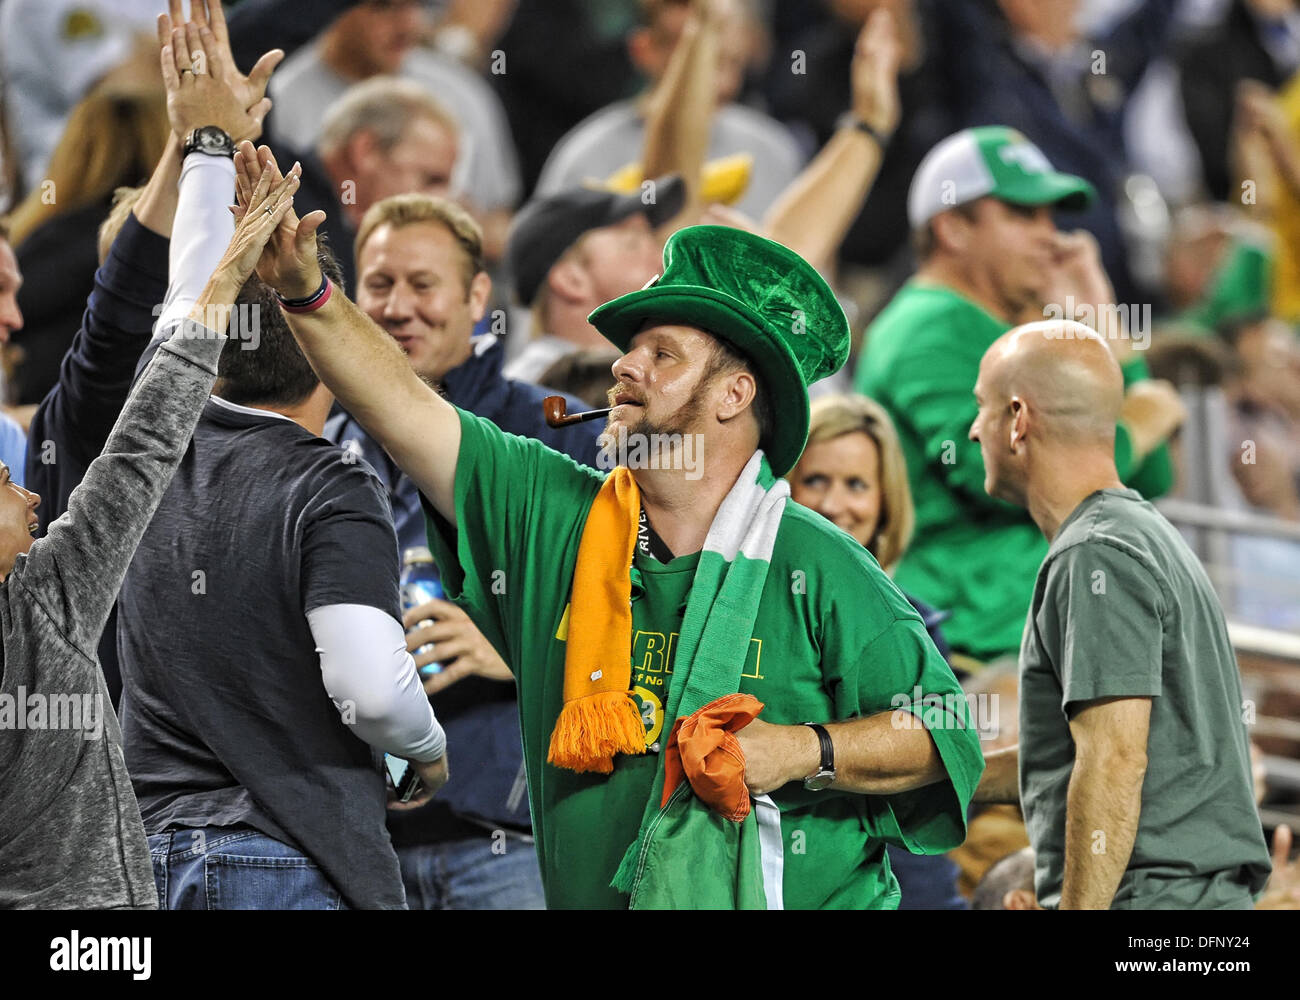 Notre Dame fans cheer .during an college football game between the Notre Dame Fighting Irish and the Arizona State Sun Devils, Saturday, Oct. 05th, 2013 in Arlington, Texas Stock Photo - Alamy